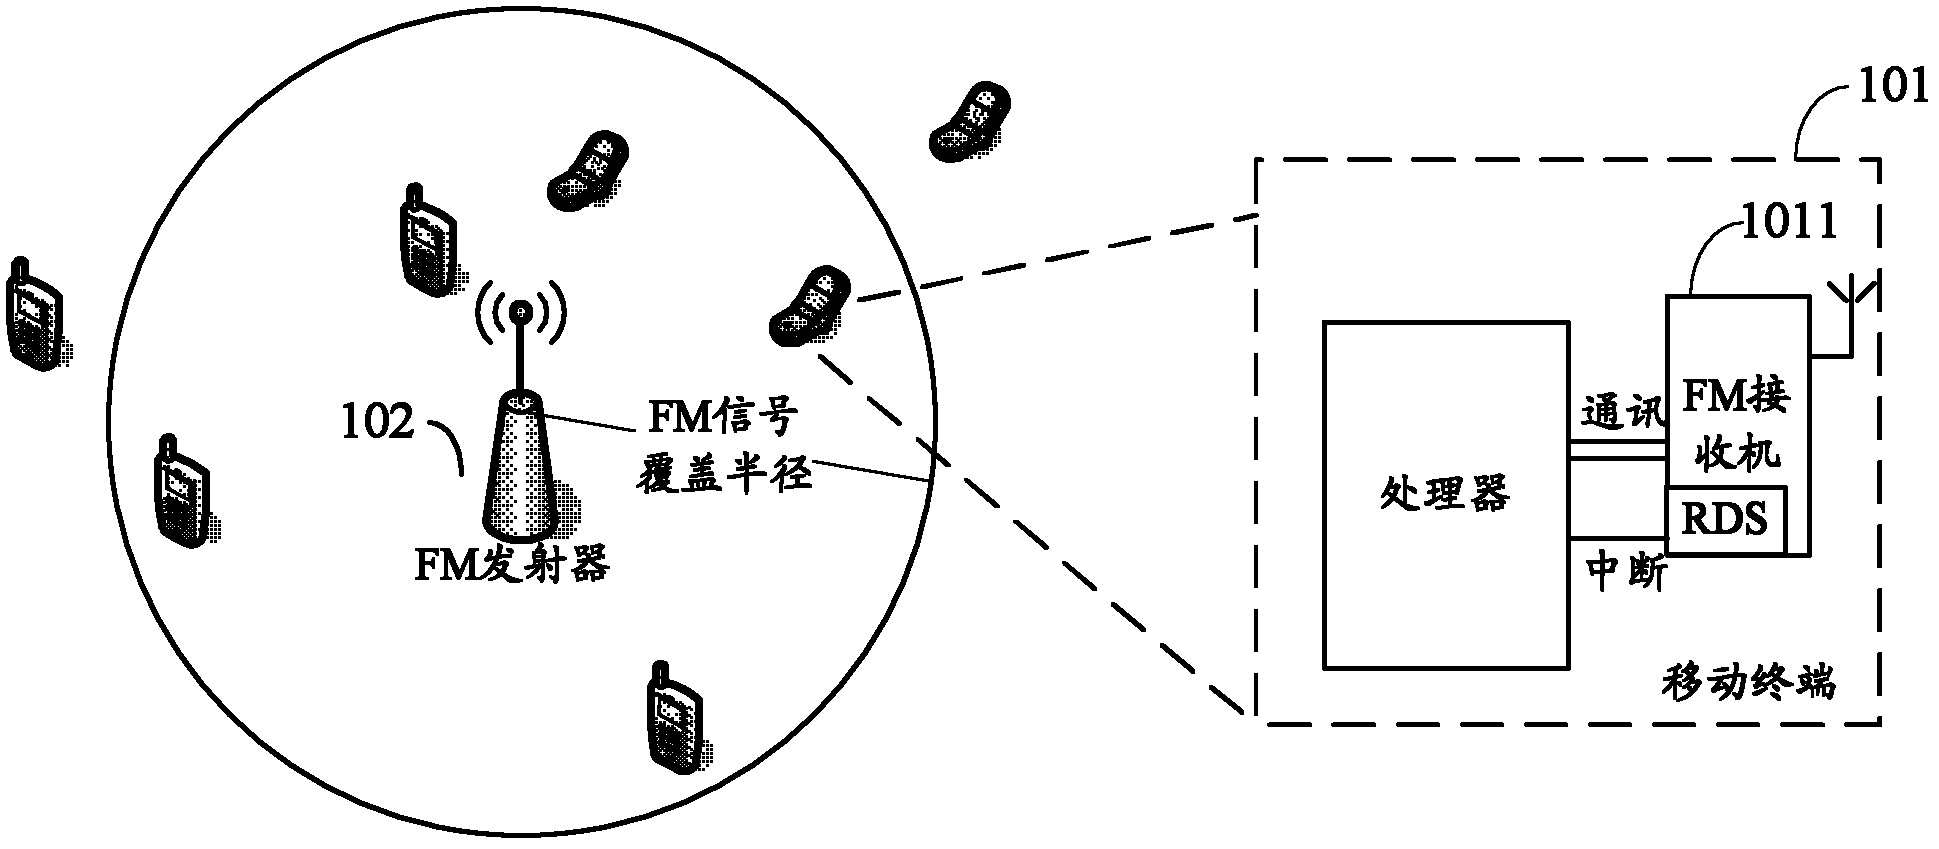 Method for executing given operation by mobile terminal, mobile terminal and communication system